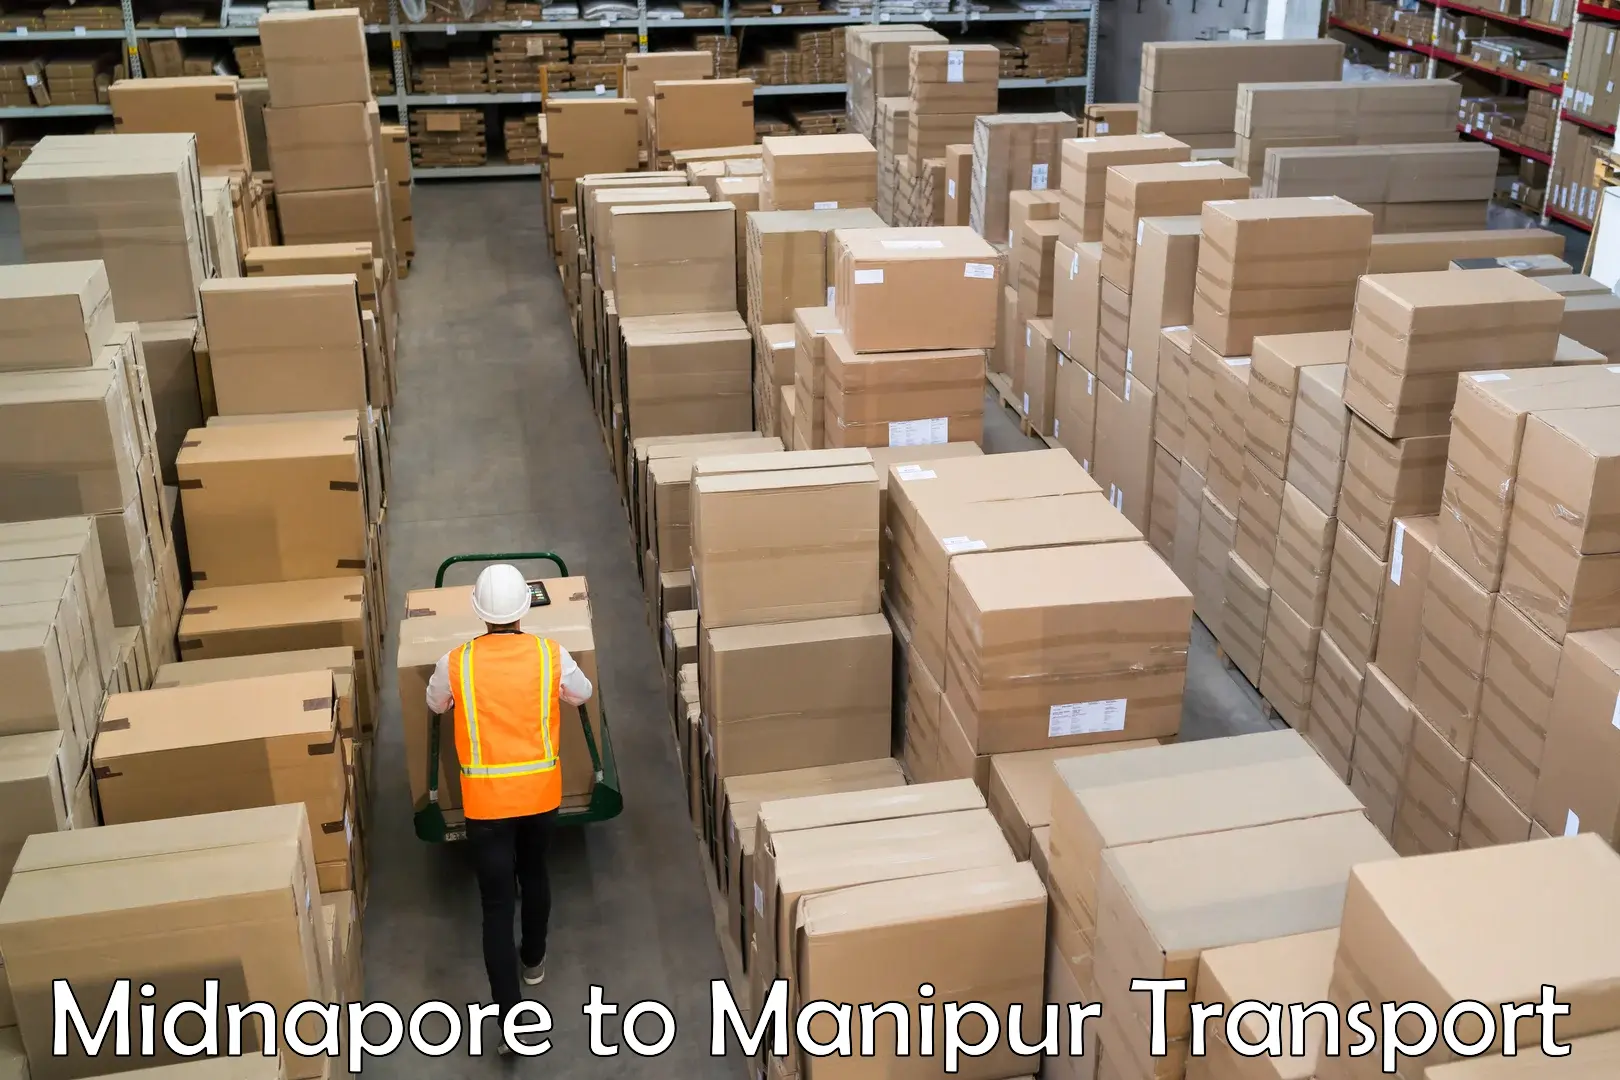 Furniture transport service Midnapore to Chandel